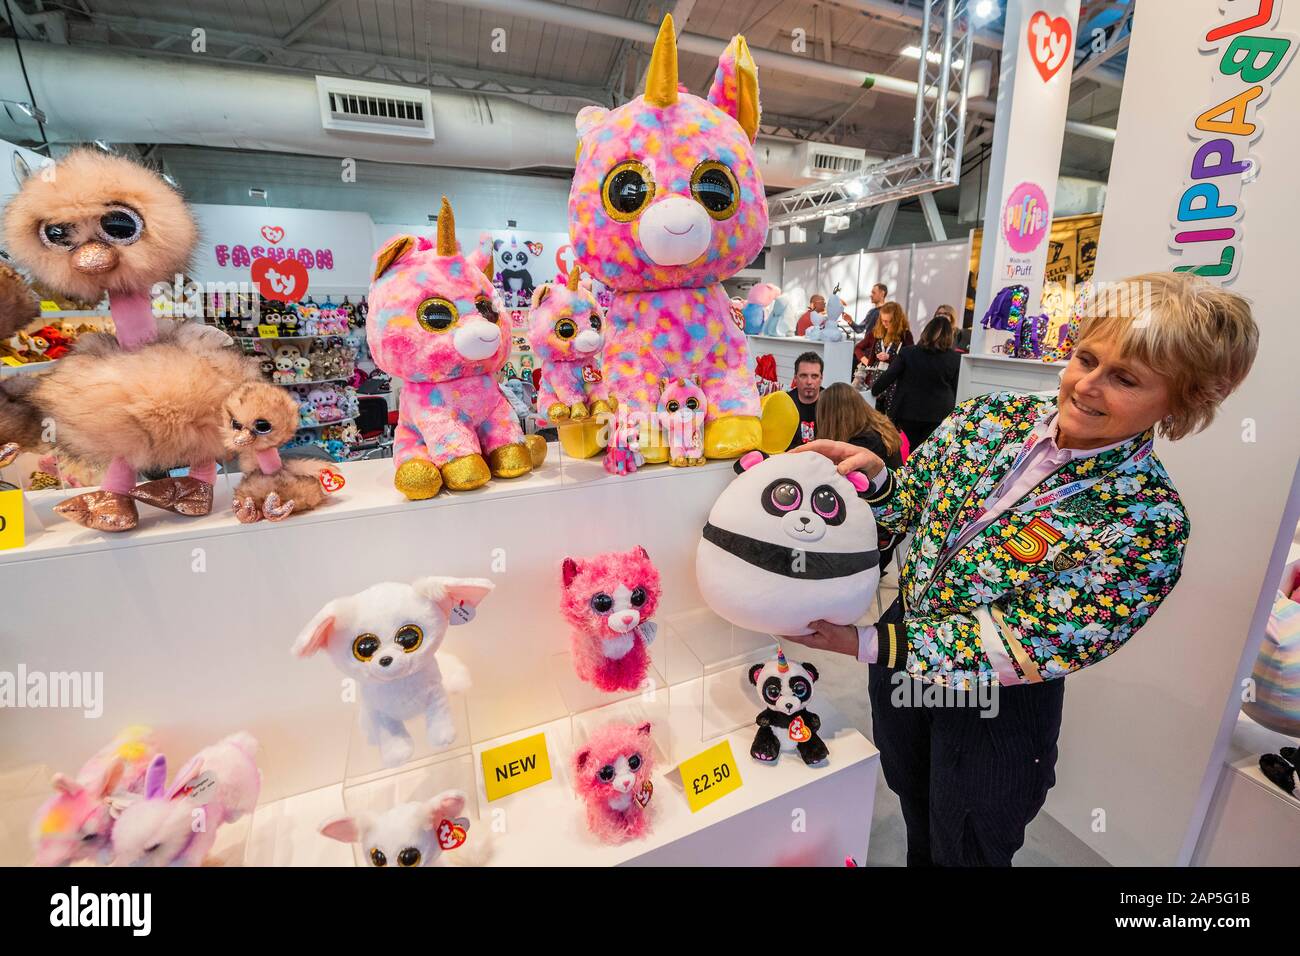 London, UK. 21st Jan 2020. Beanie Boos from Ty toys - The Toy fair opens at London's Olympia exhibition centre, organised by the British Toy & Hobby Association. Credit: Guy Bell/Alamy Live News Stock Photo